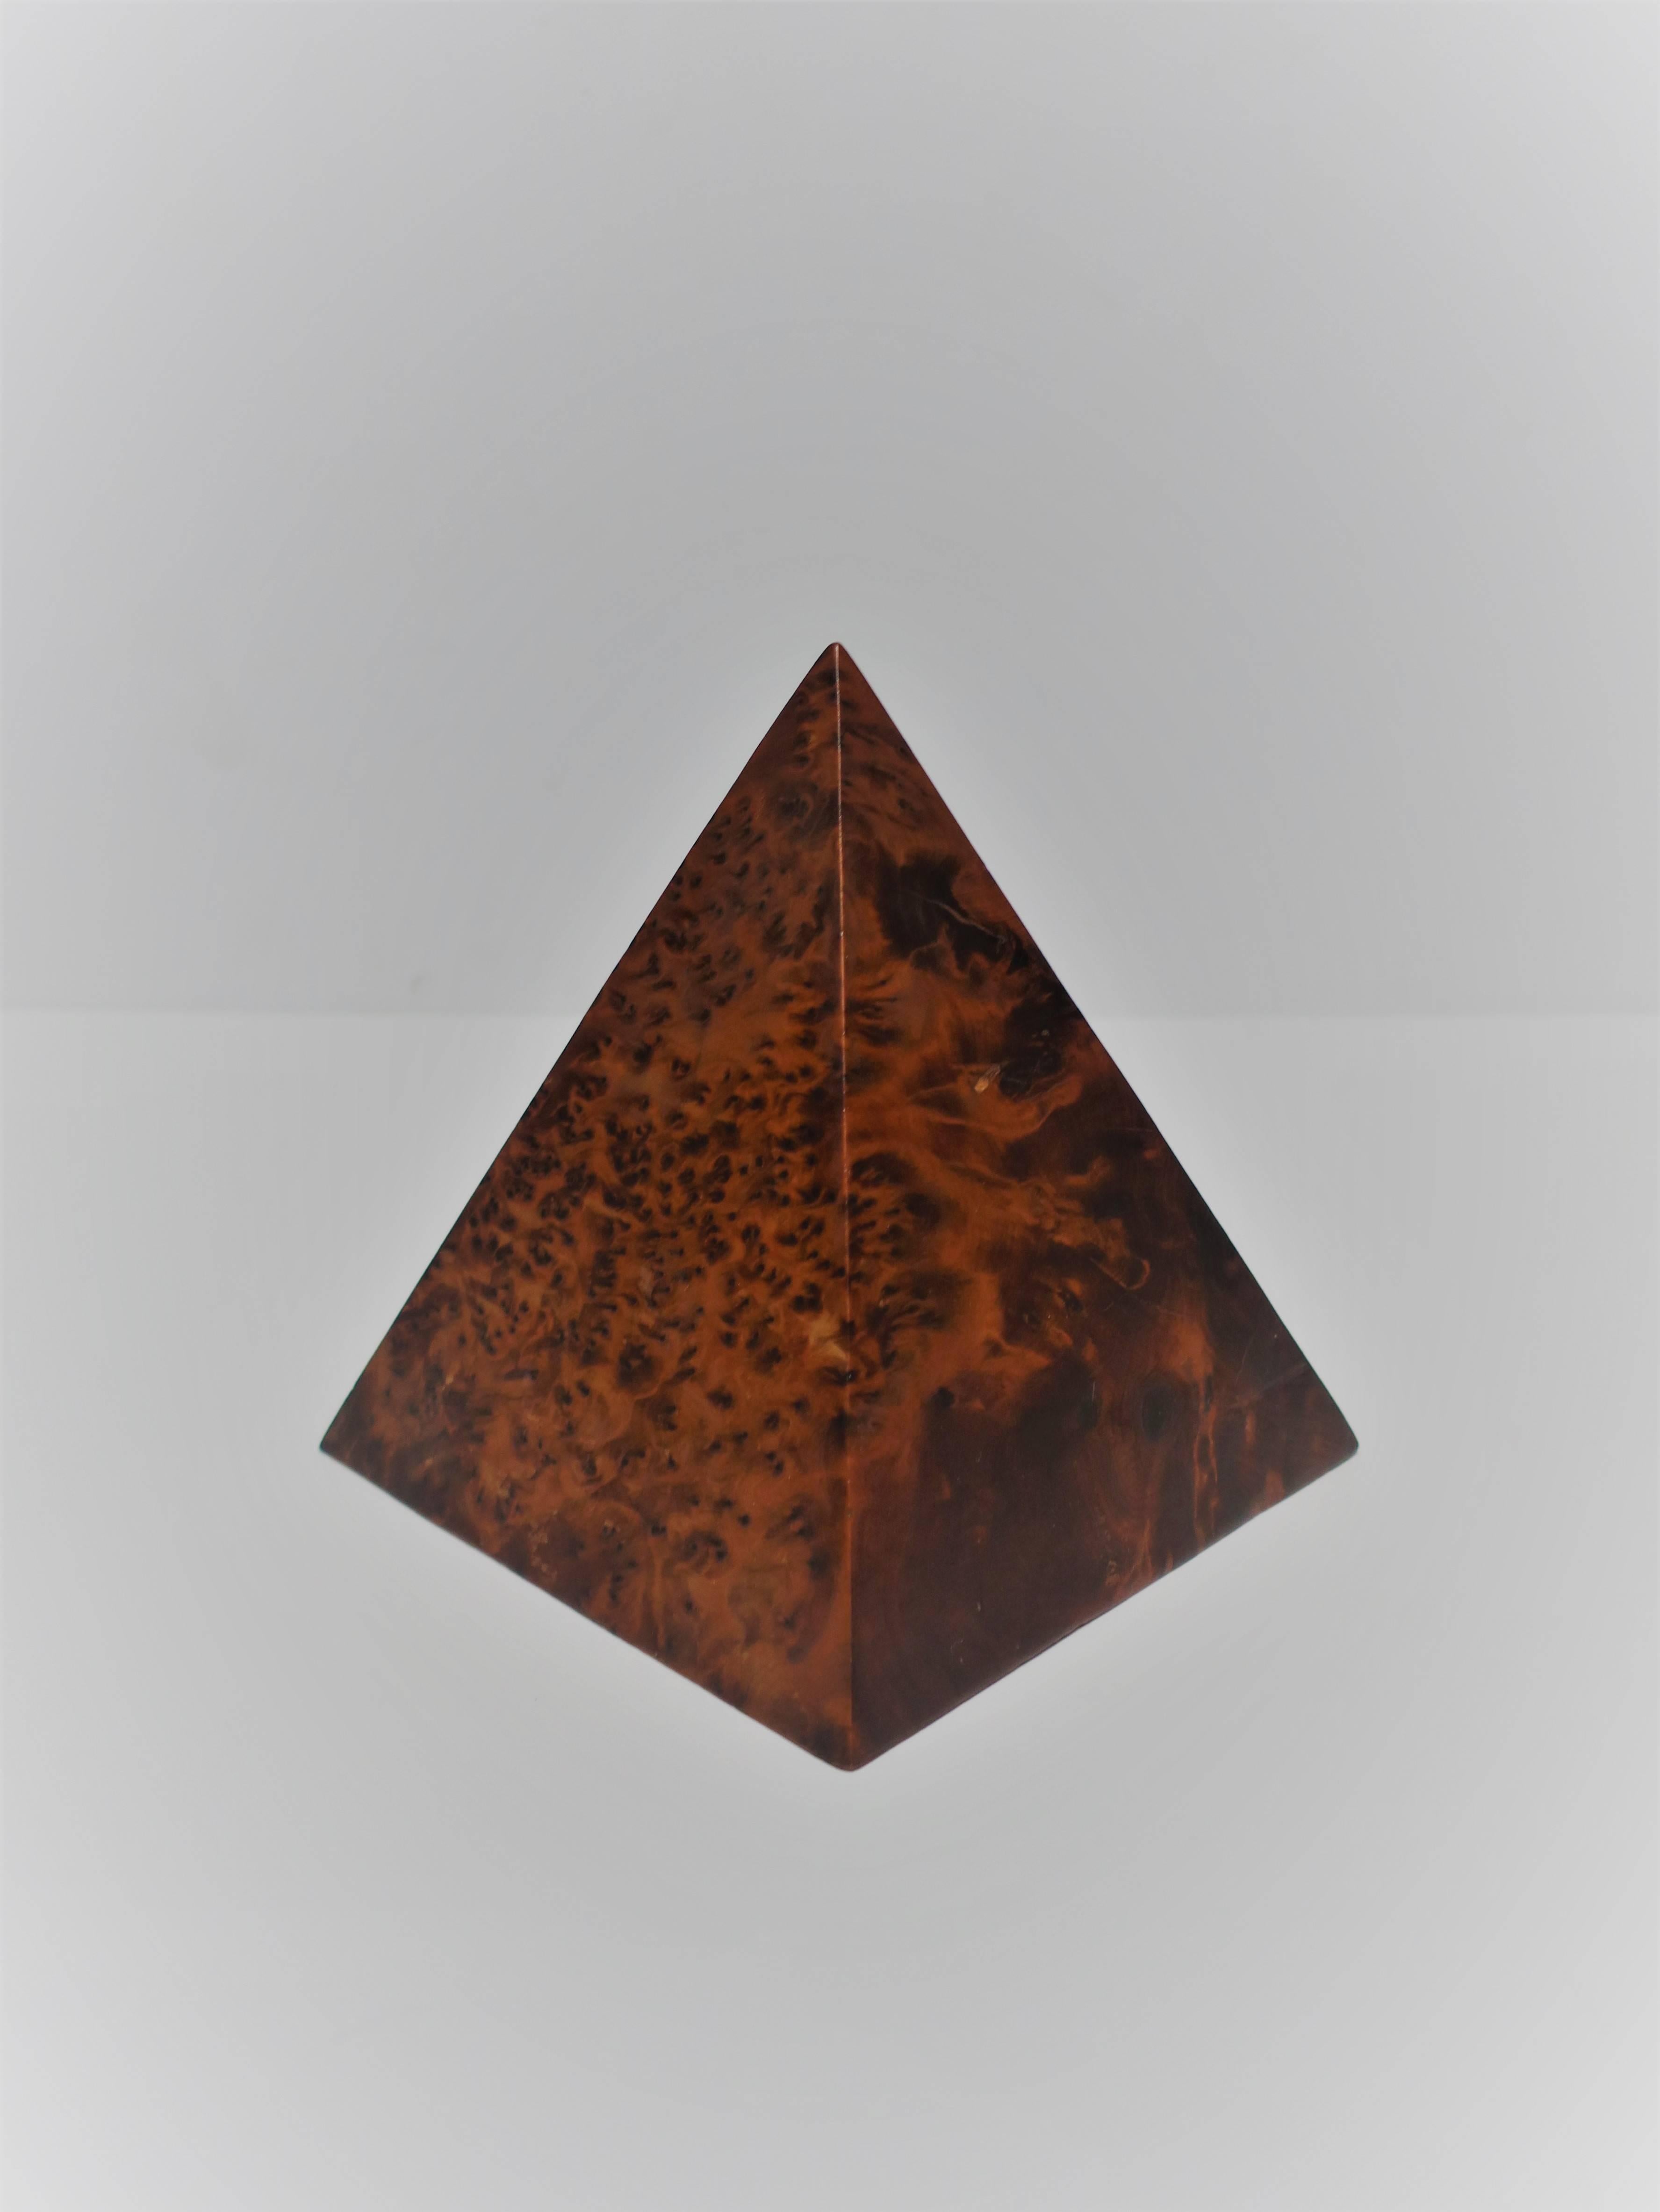 A warm and rich burl wood pyramid decorative object or sculpture. 

Piece measures: 6.75